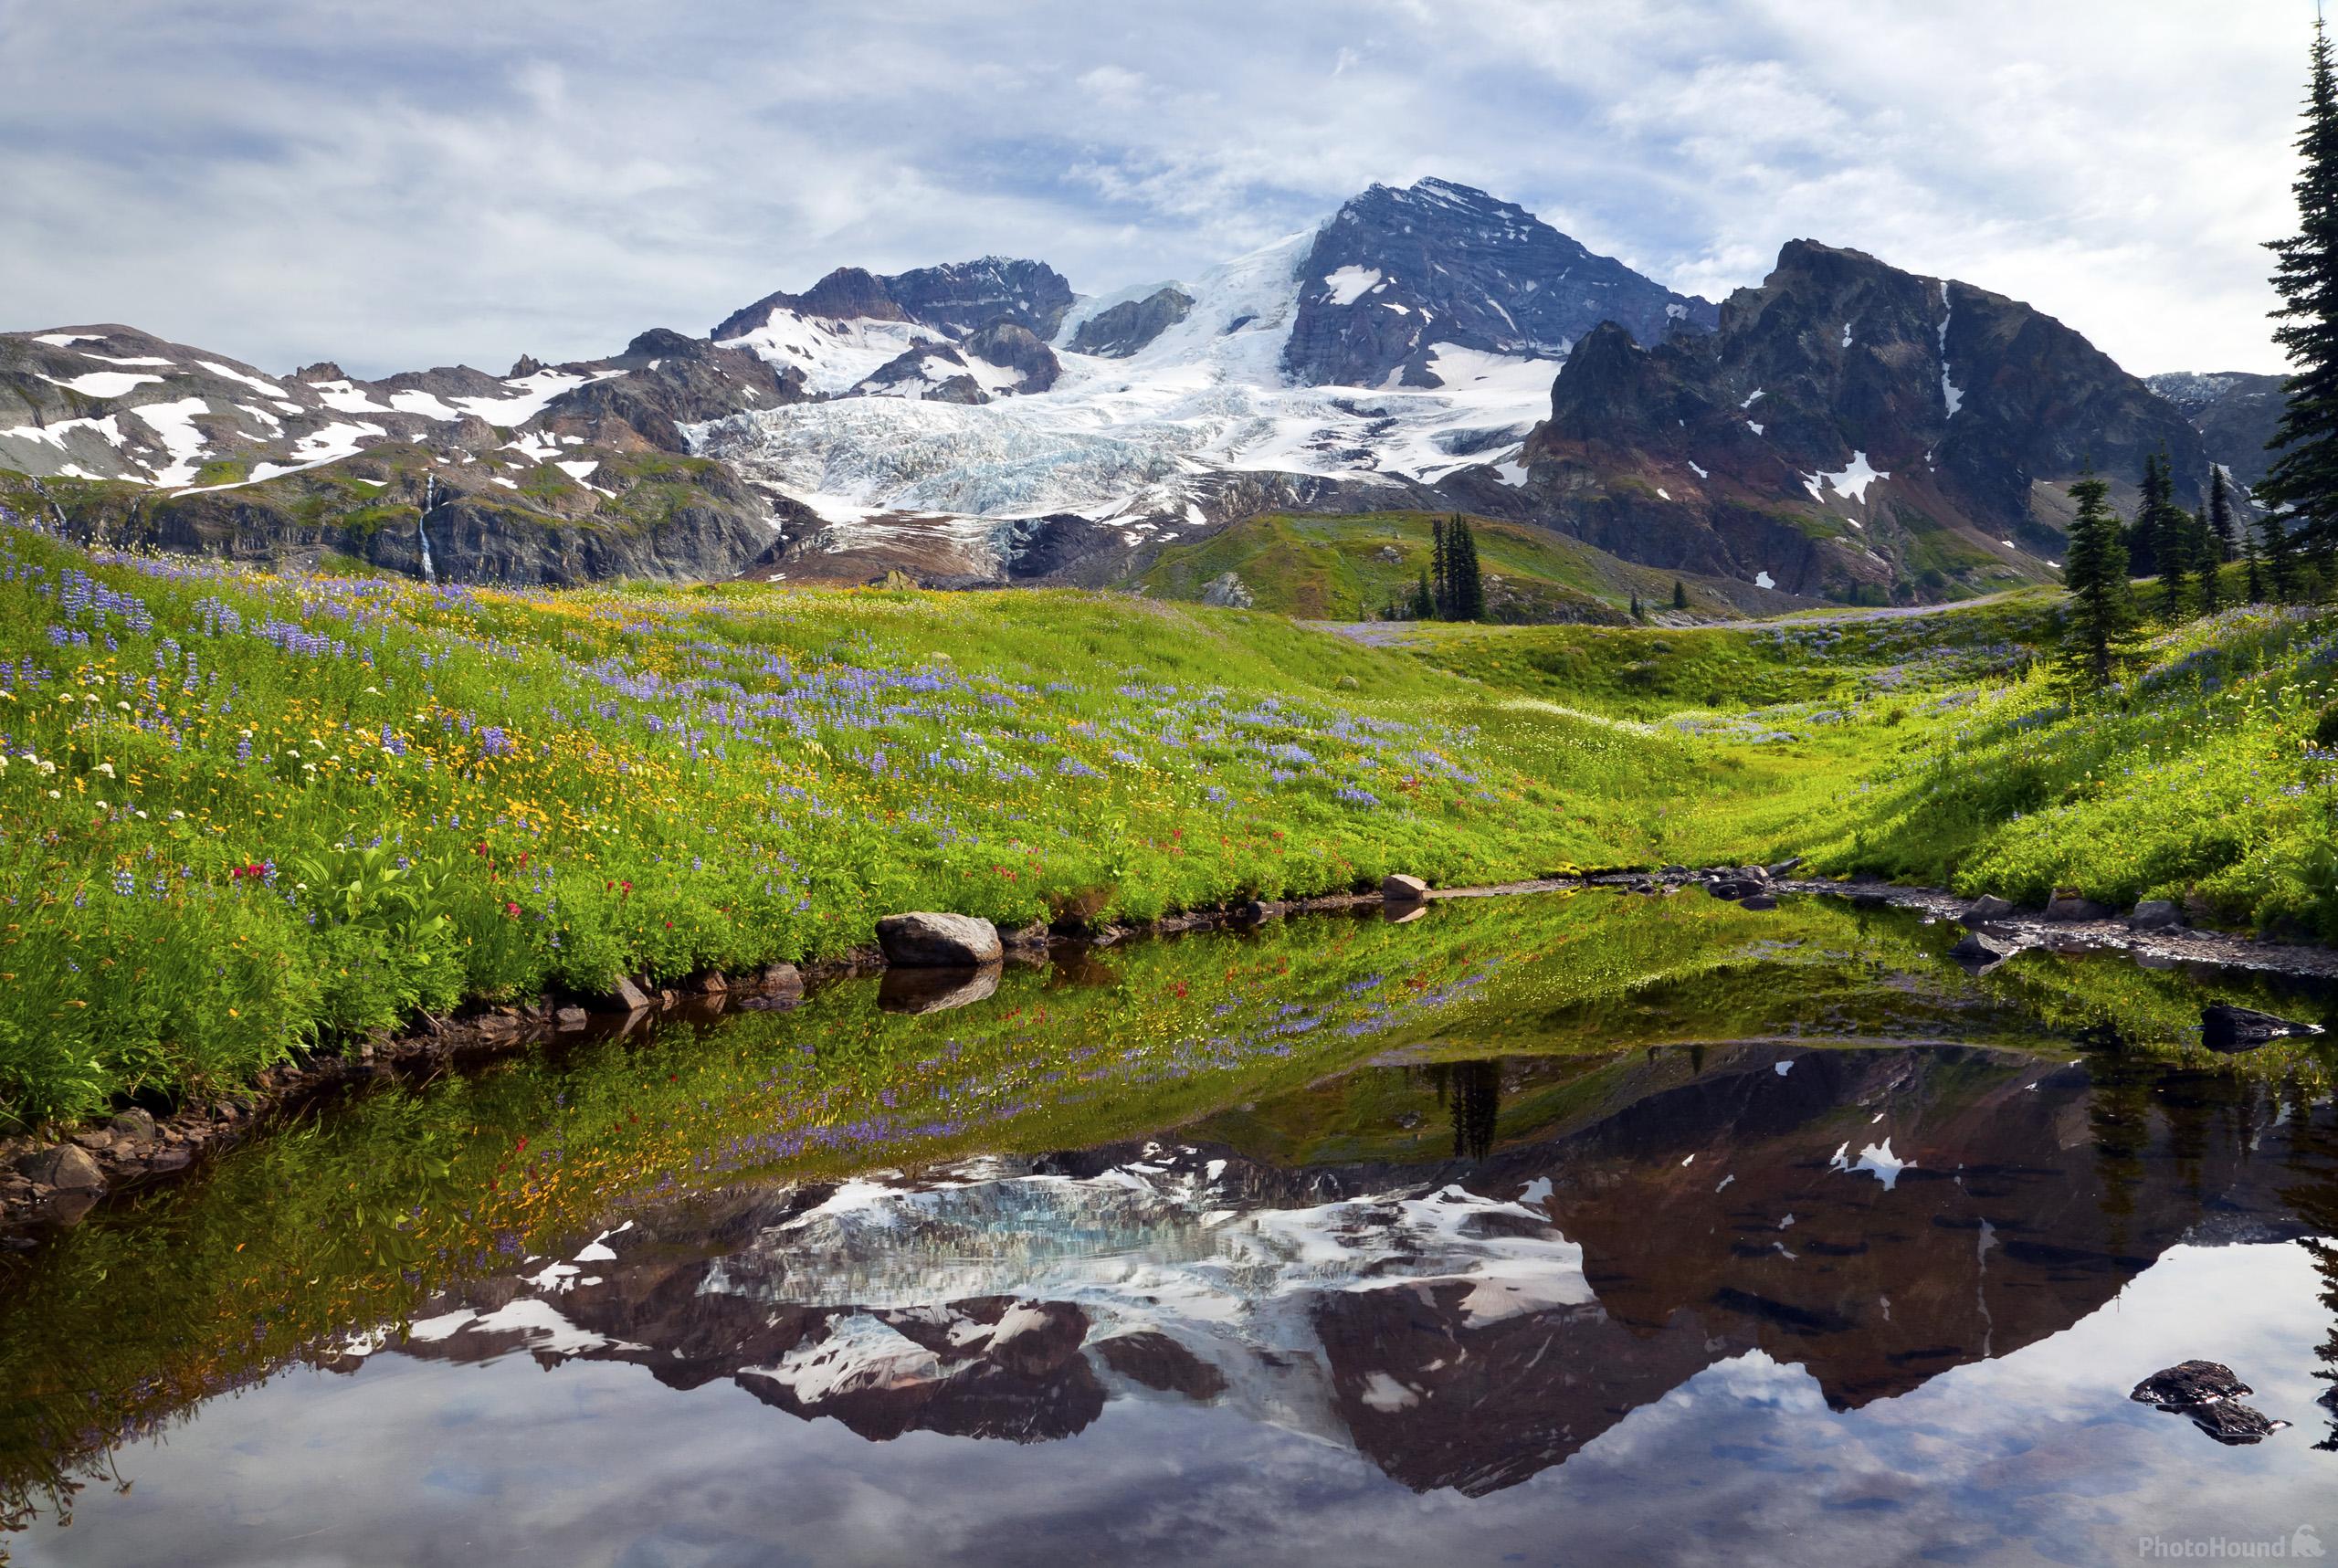 Image of Emerald Ridge, Mount Rainier National Park by T. Kirkendall and V. Spring